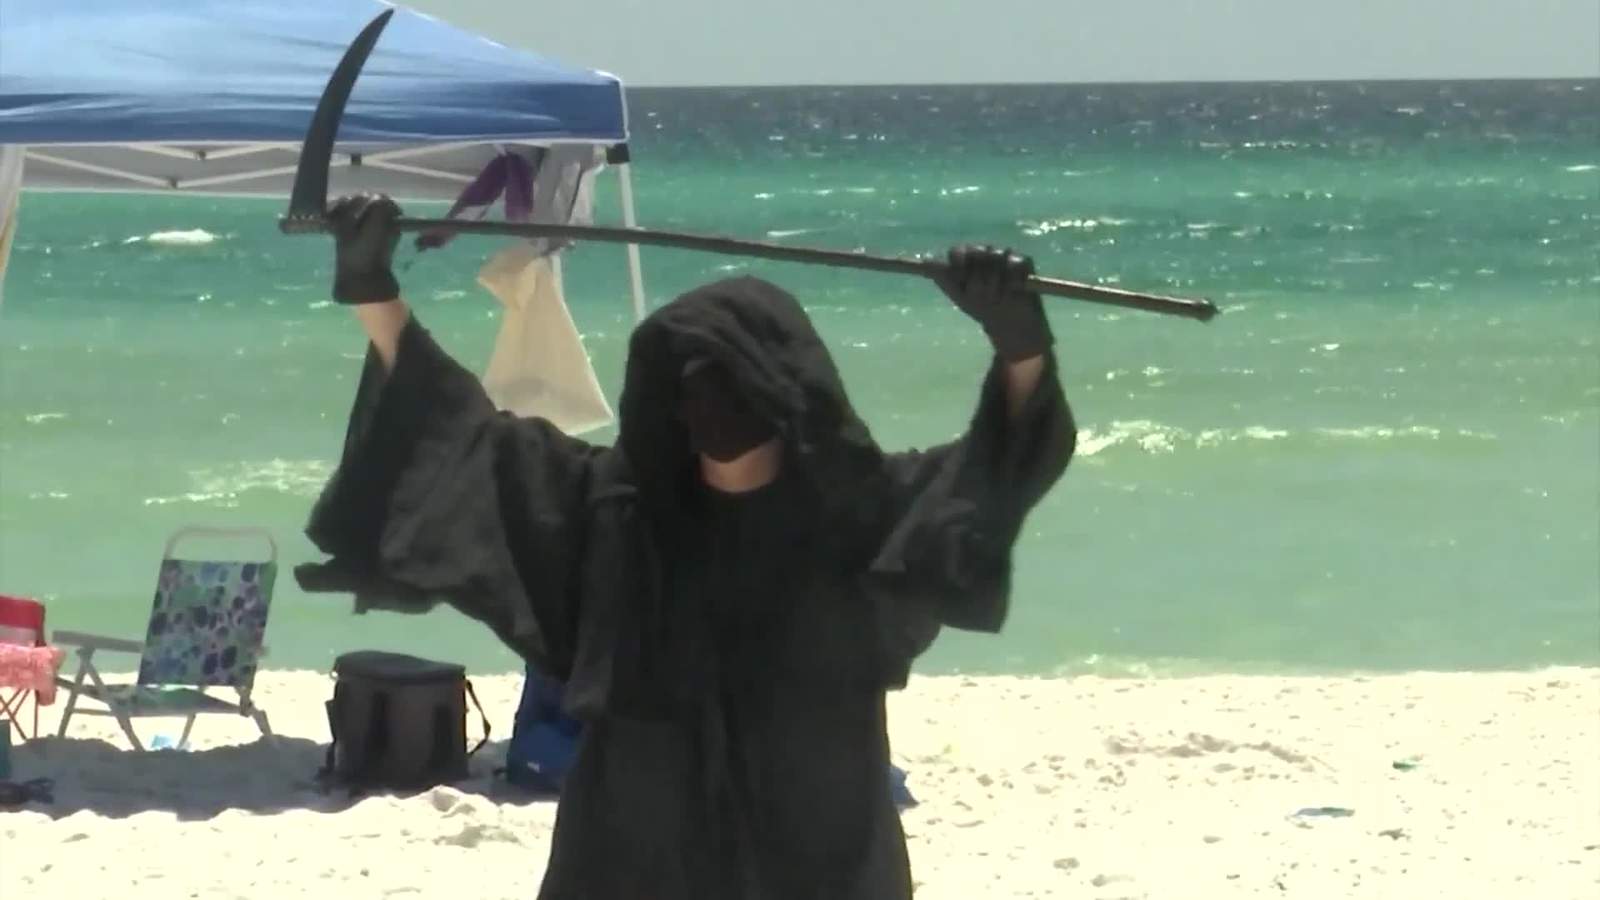 Florida lawyer dresses as Grim Reaper to protest reopening of beaches